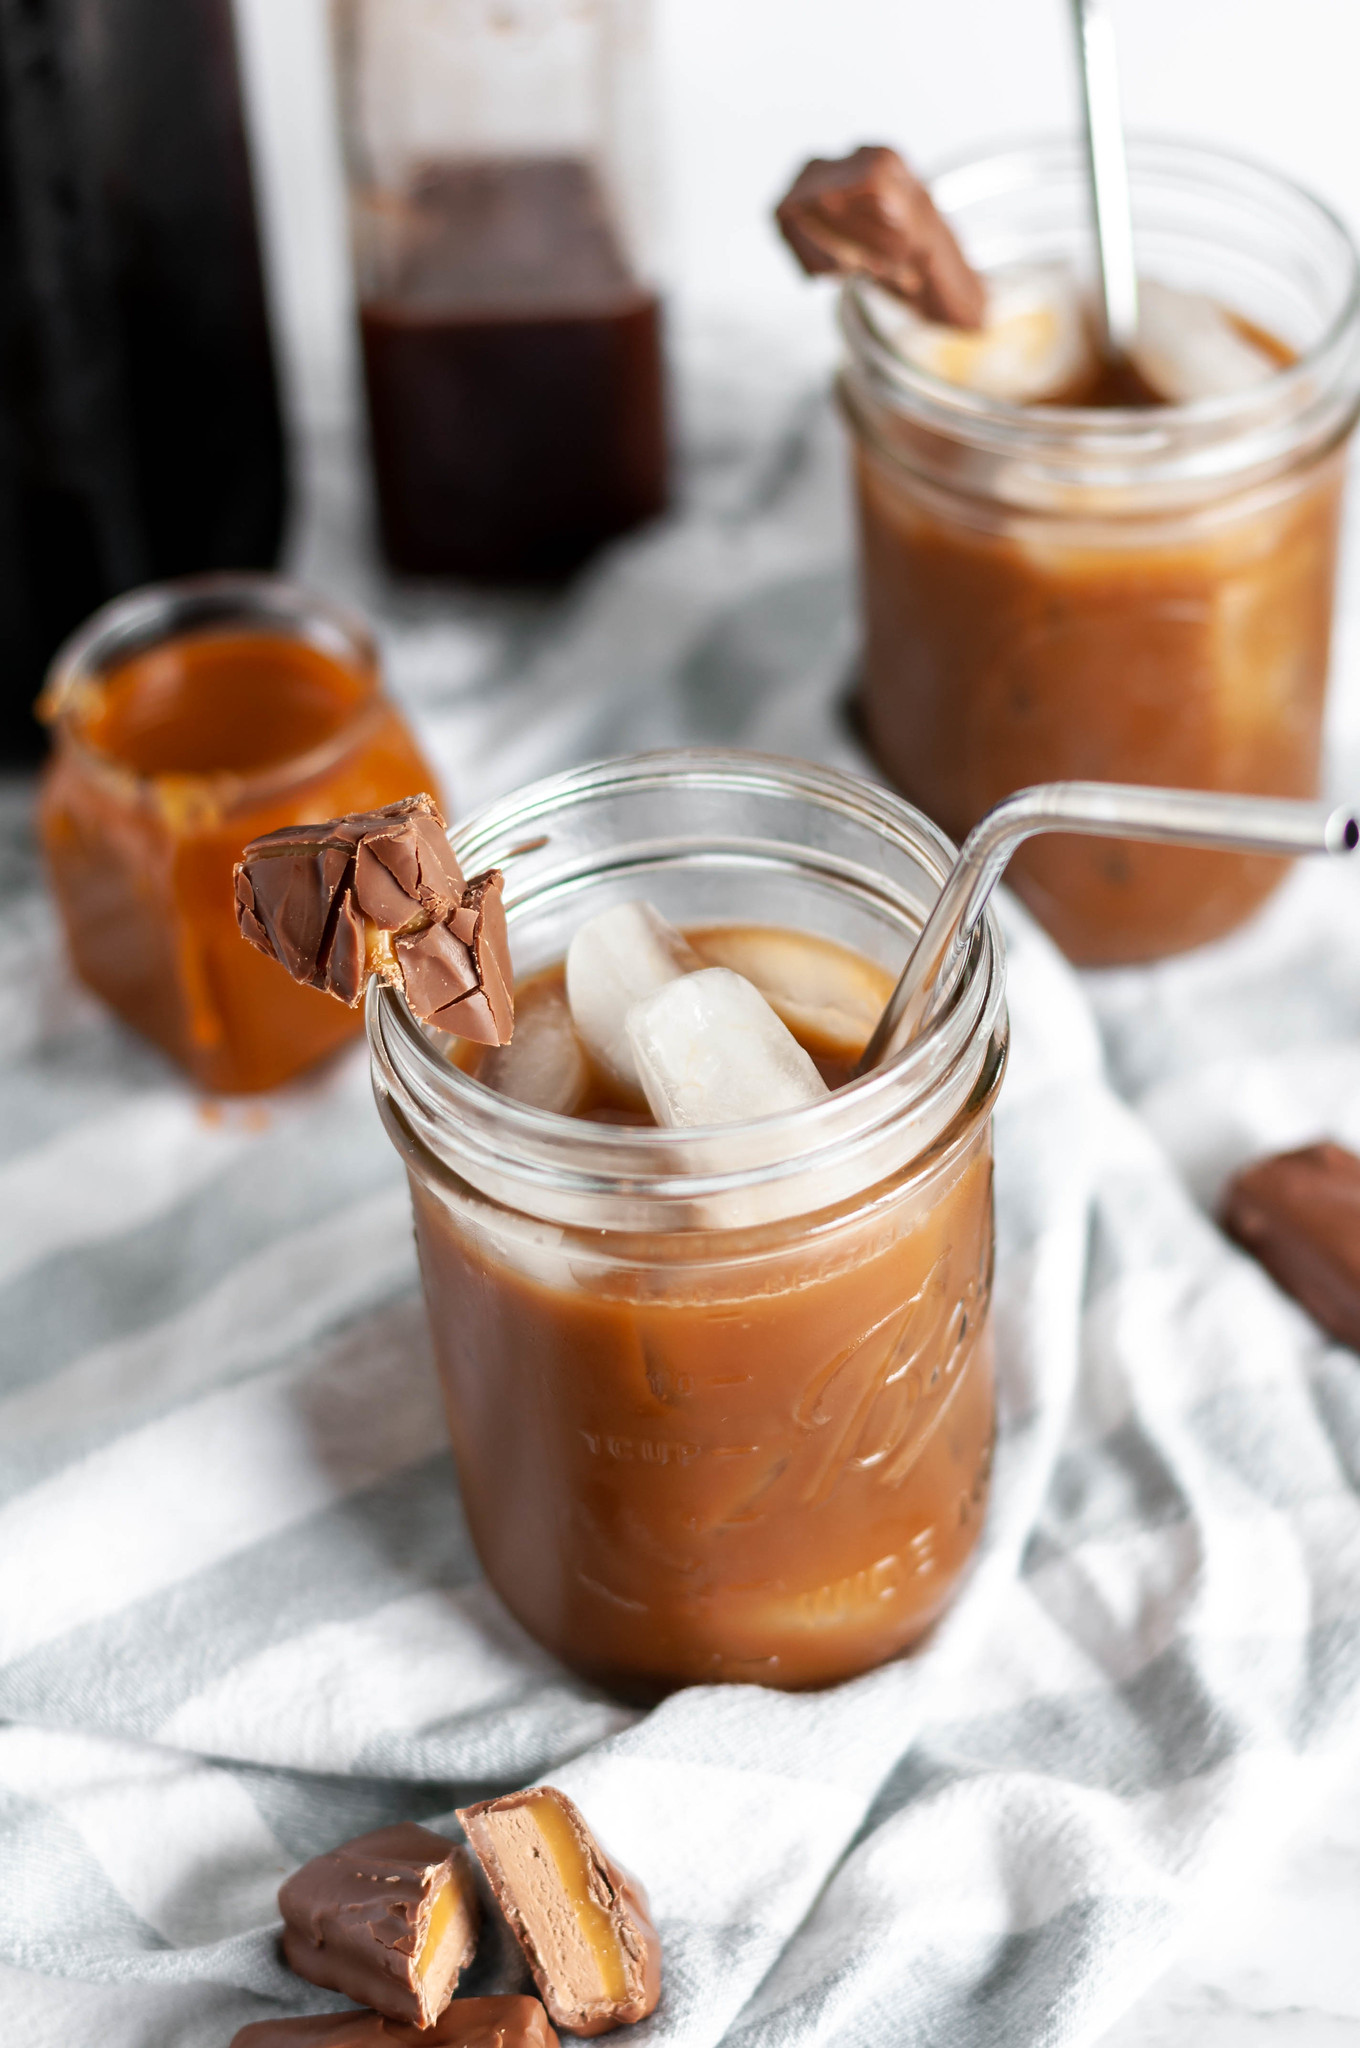 Milky Way Iced Coffee takes all the classic chocolate, caramel and malt flavors of the candy bar and turns it into the perfect way to start your morning.